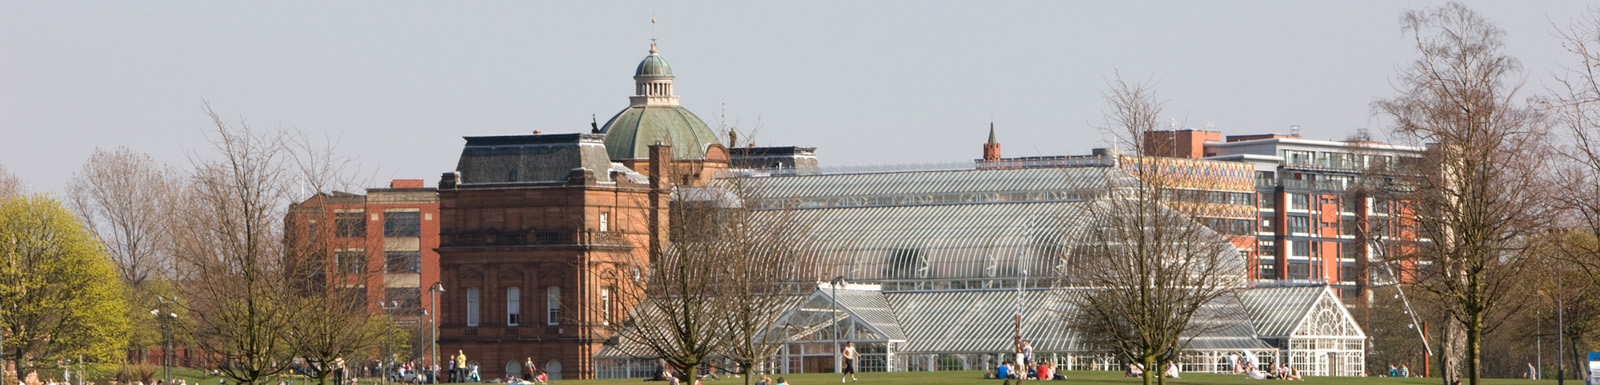 The People's Palace and Winter Gardens at Glasgow Green